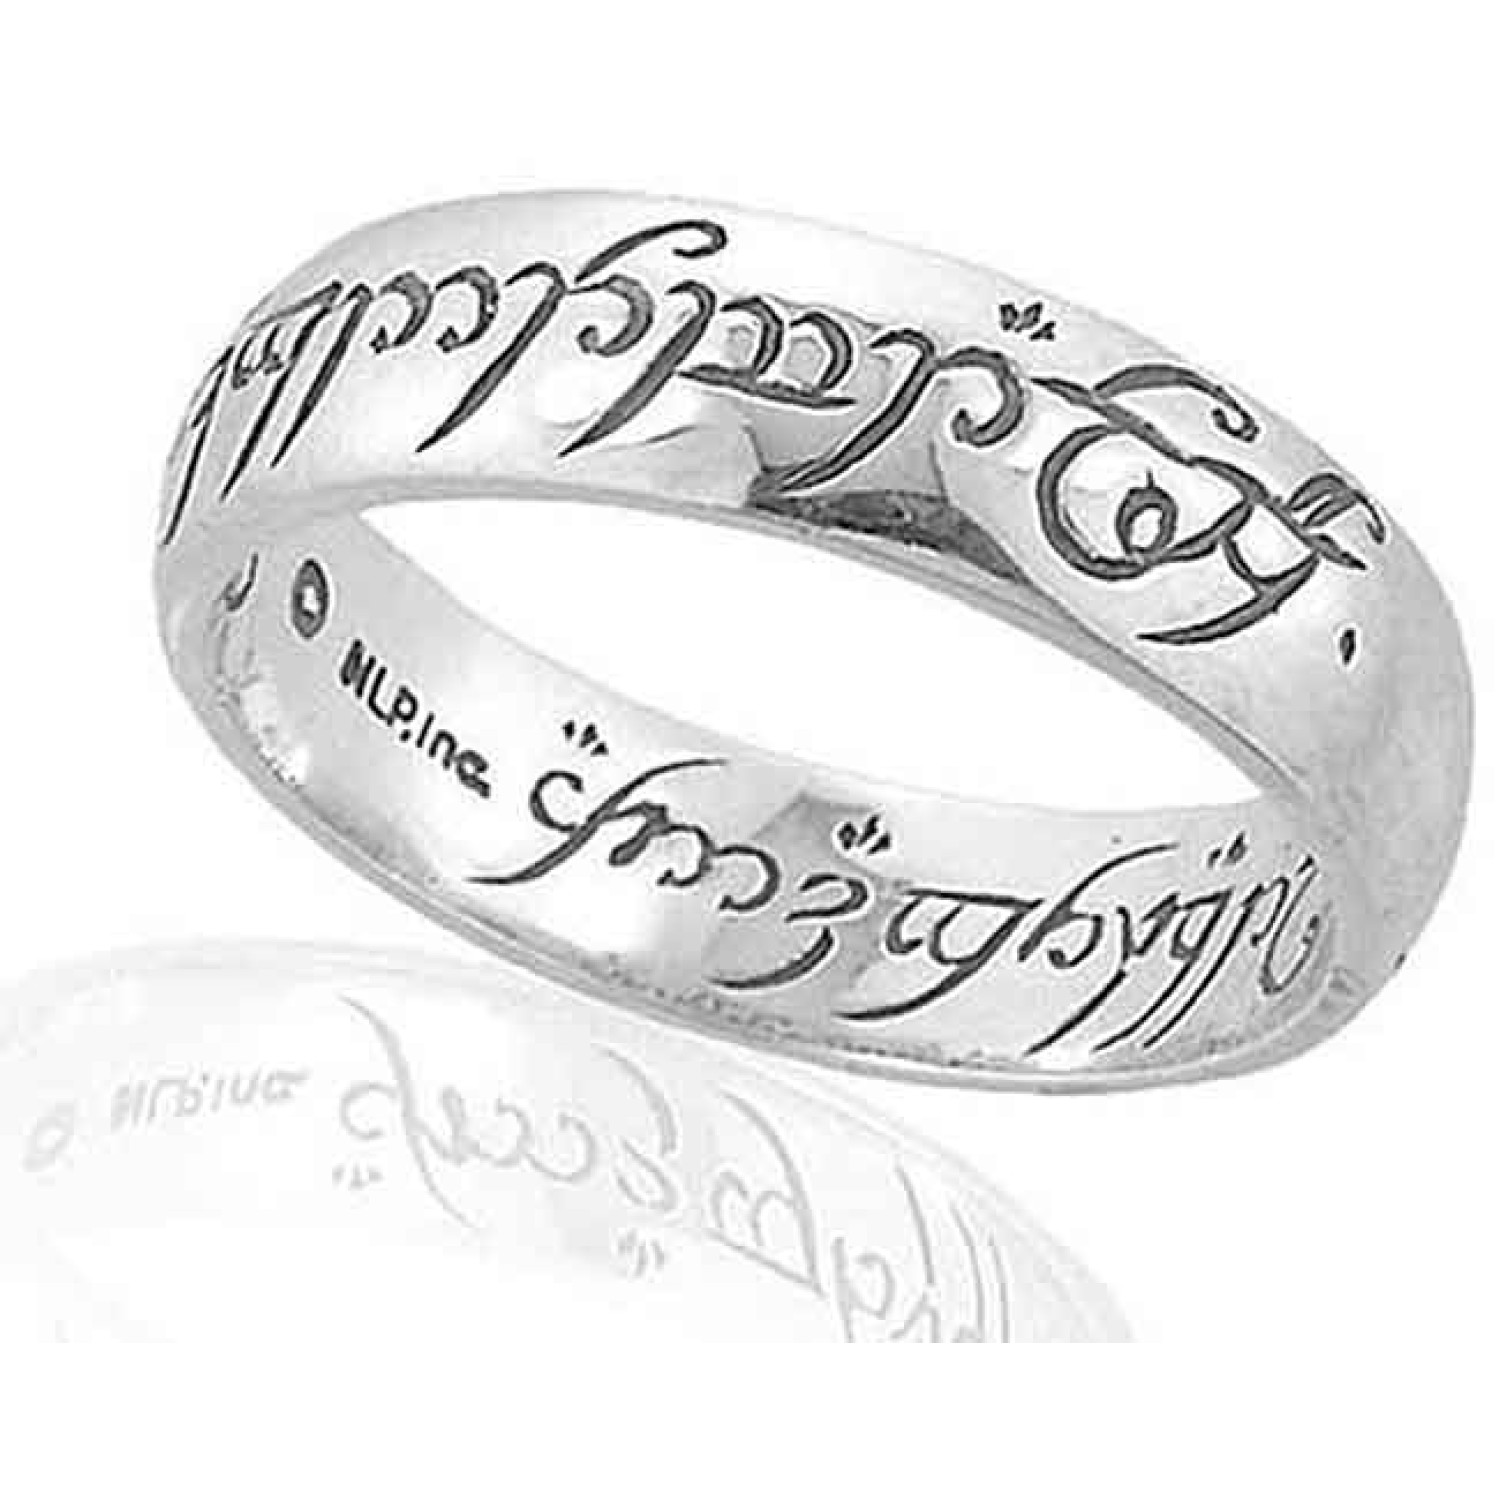 Lord Of The Rings One Ring - Lord of the Rings Jewelery - Lord of the Rings Jewelry - lord of the rings ring for sale